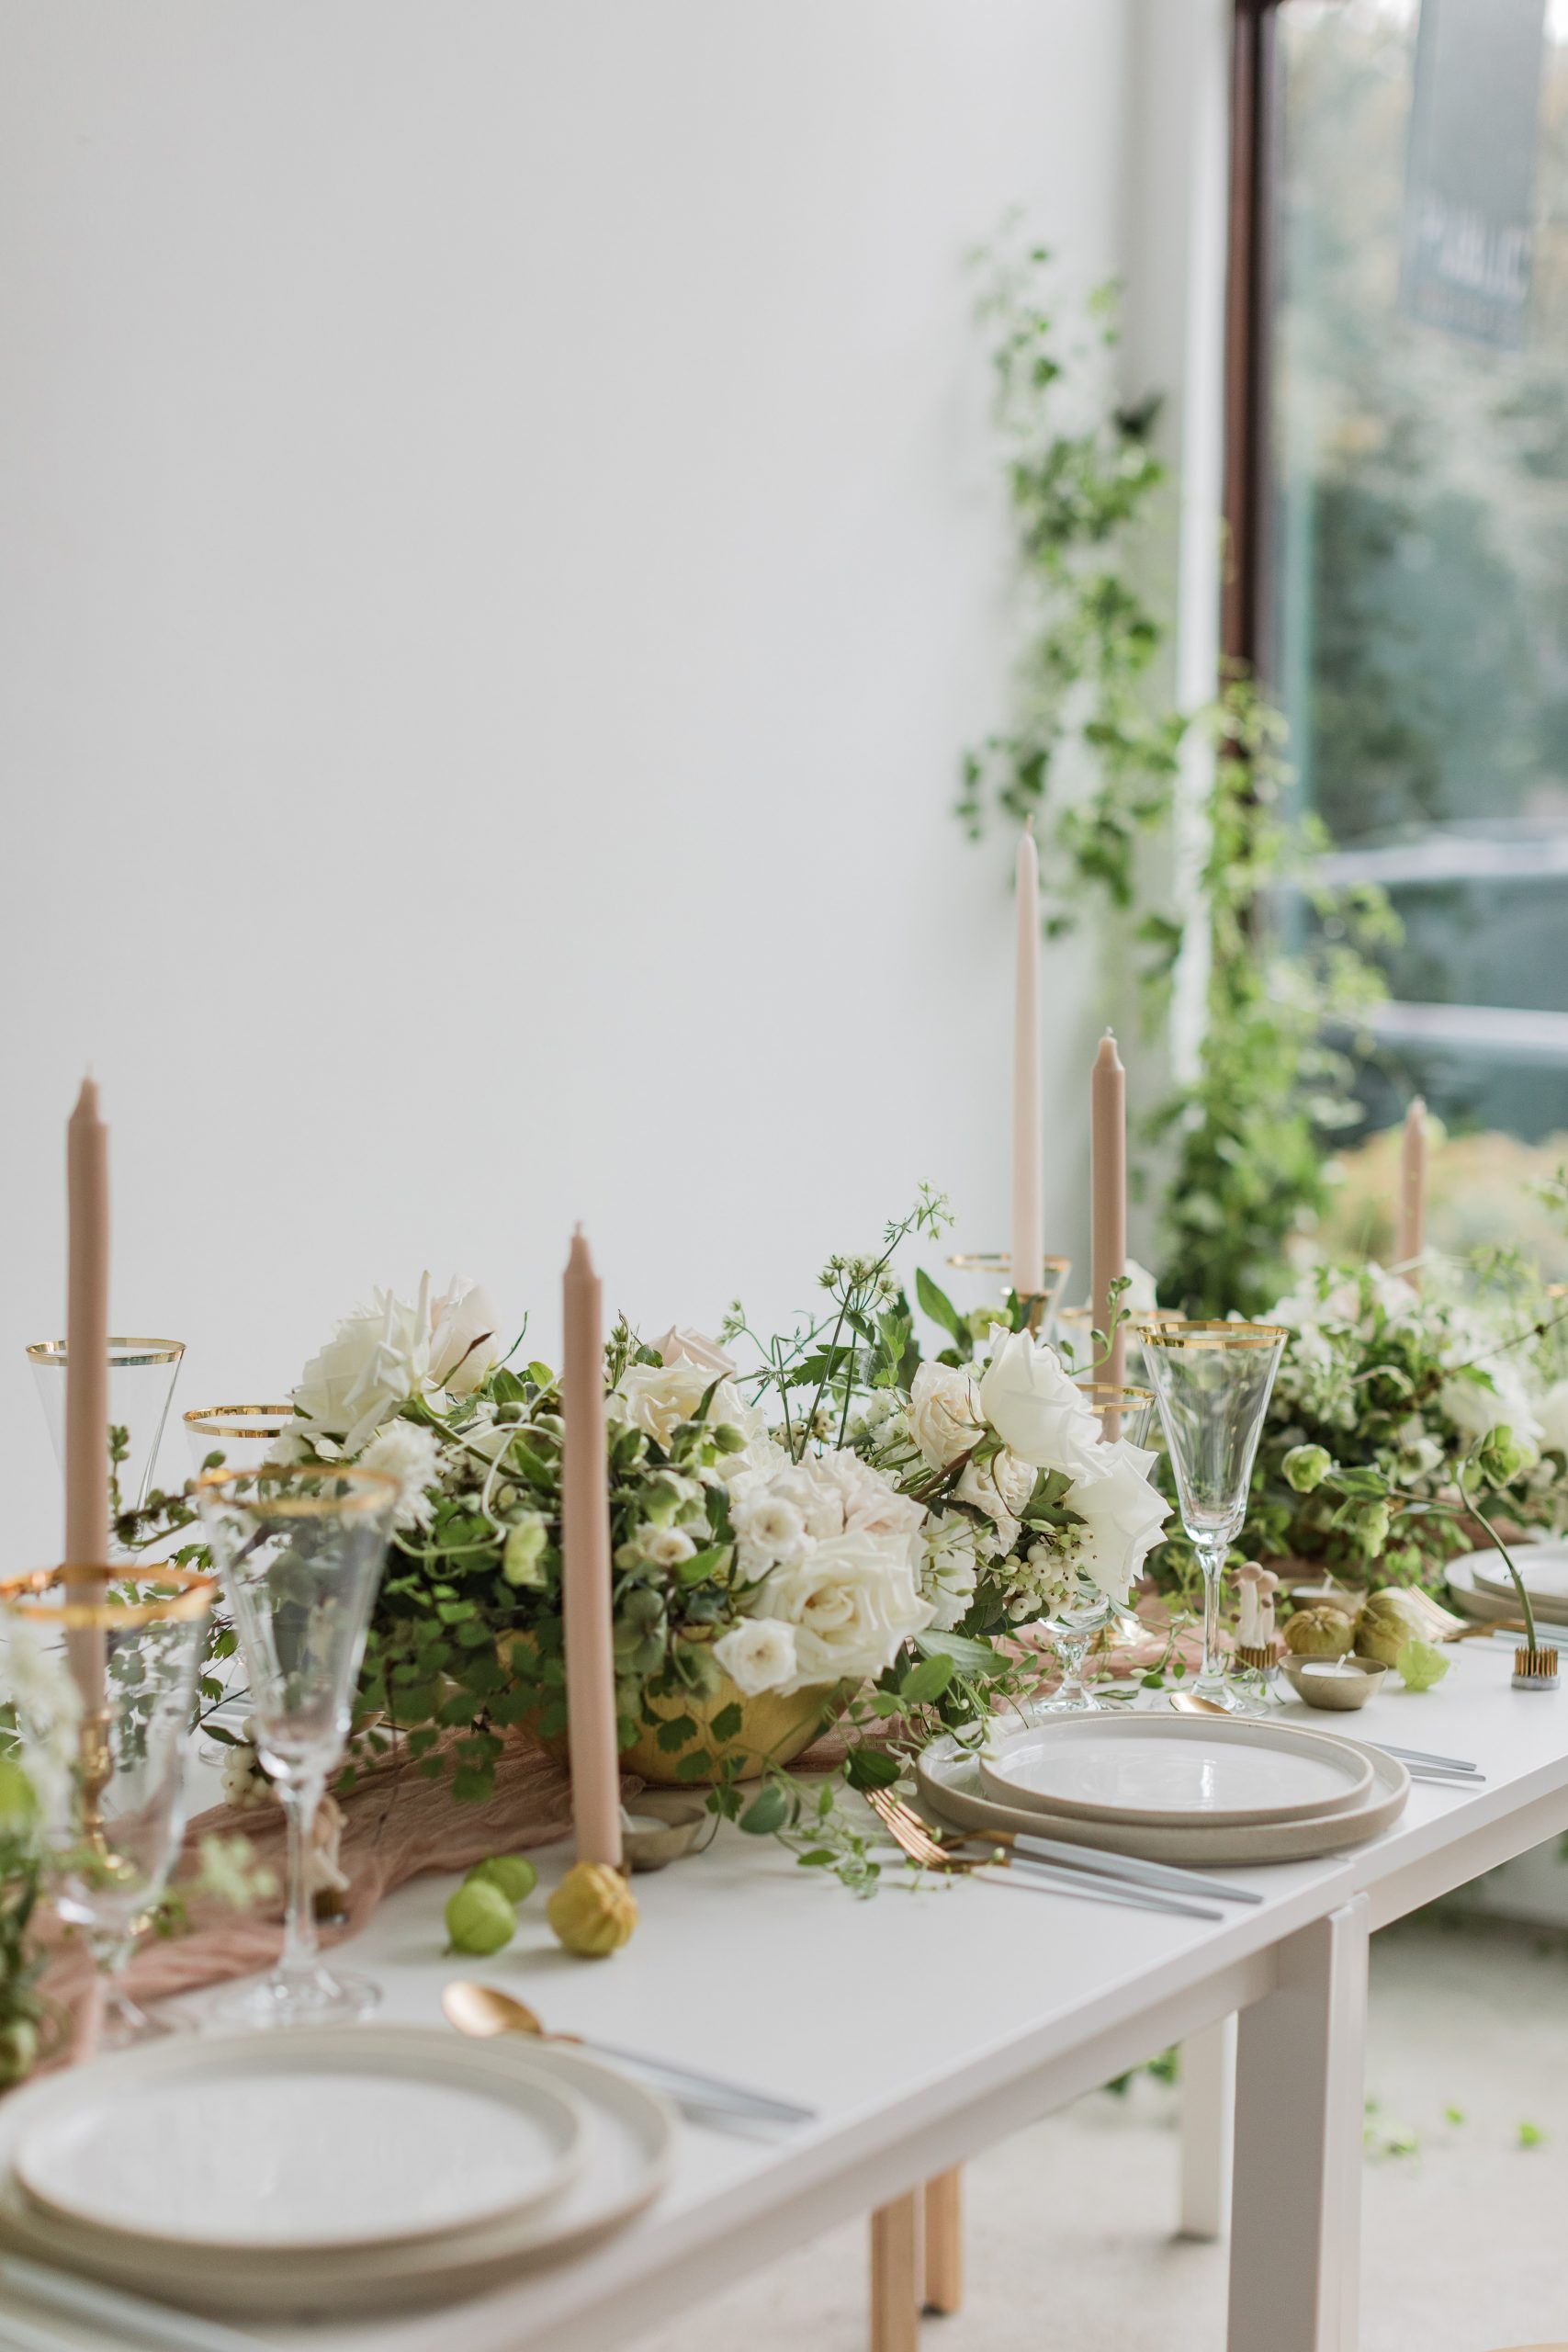 A white wedding table setup with window in the background